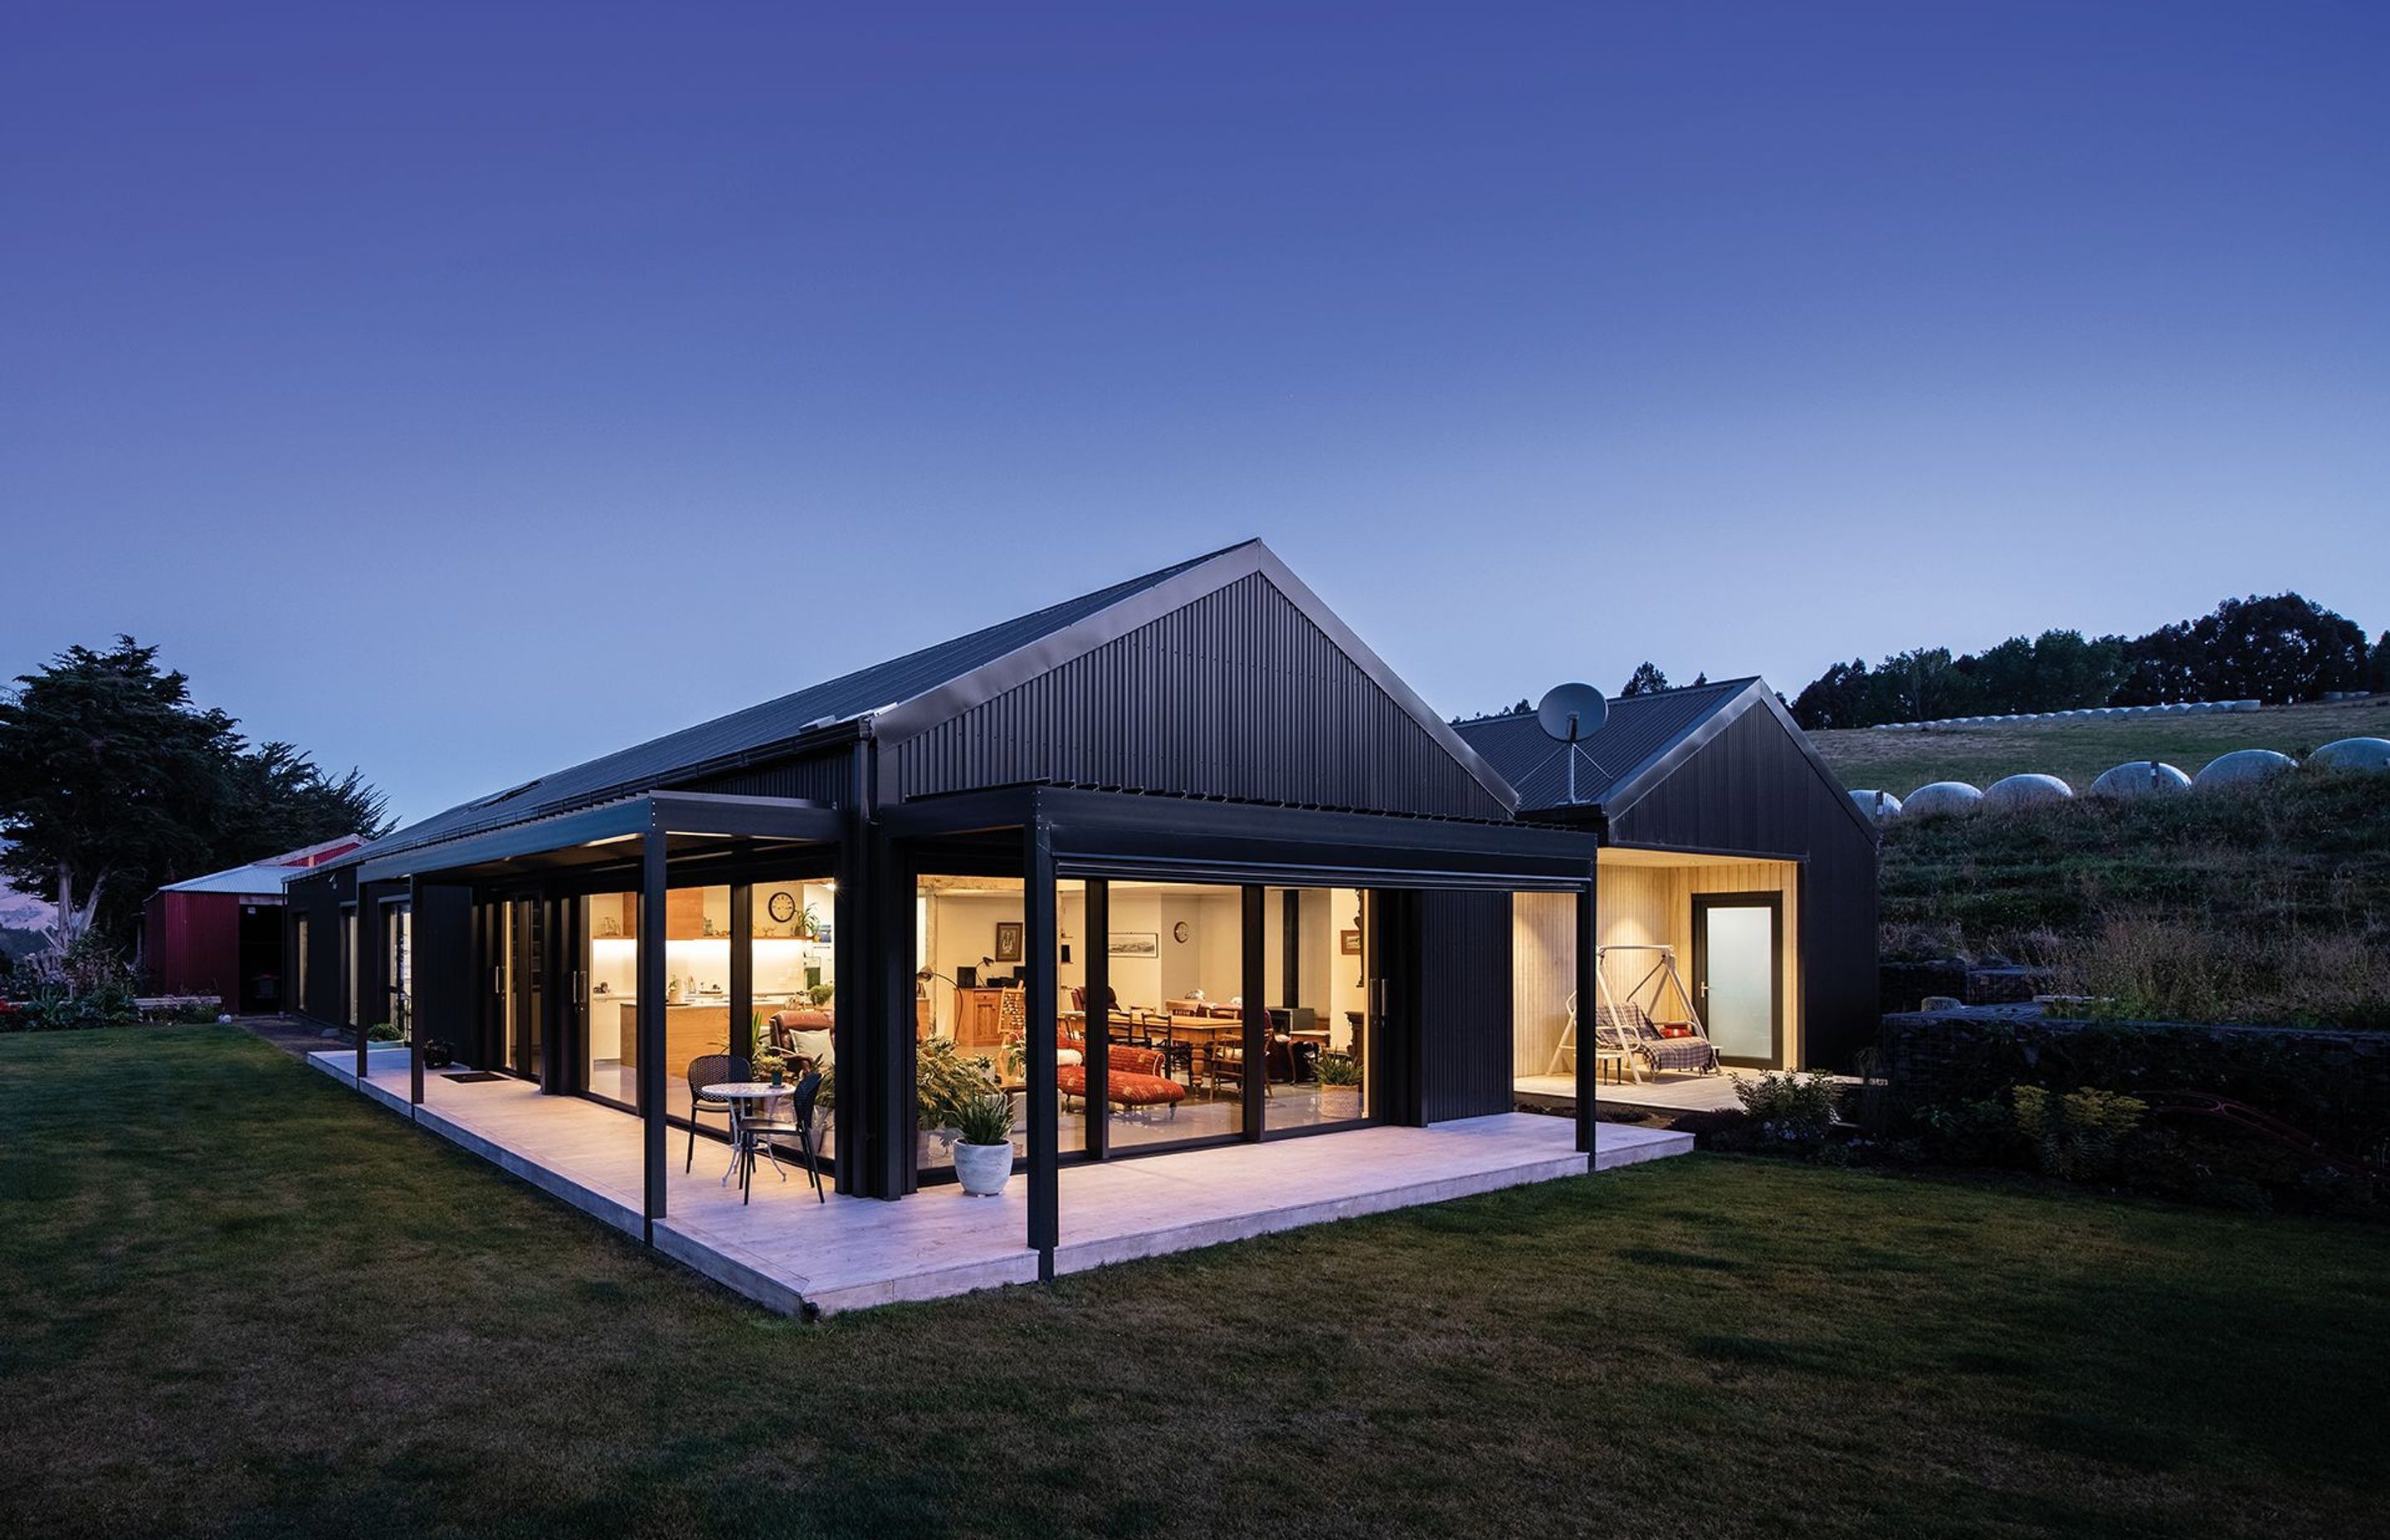 The new home provides an open, flexible living environment with a seamless connection to the surroundings. A new structure adjacent to the shed contains the garage and a large storage area.